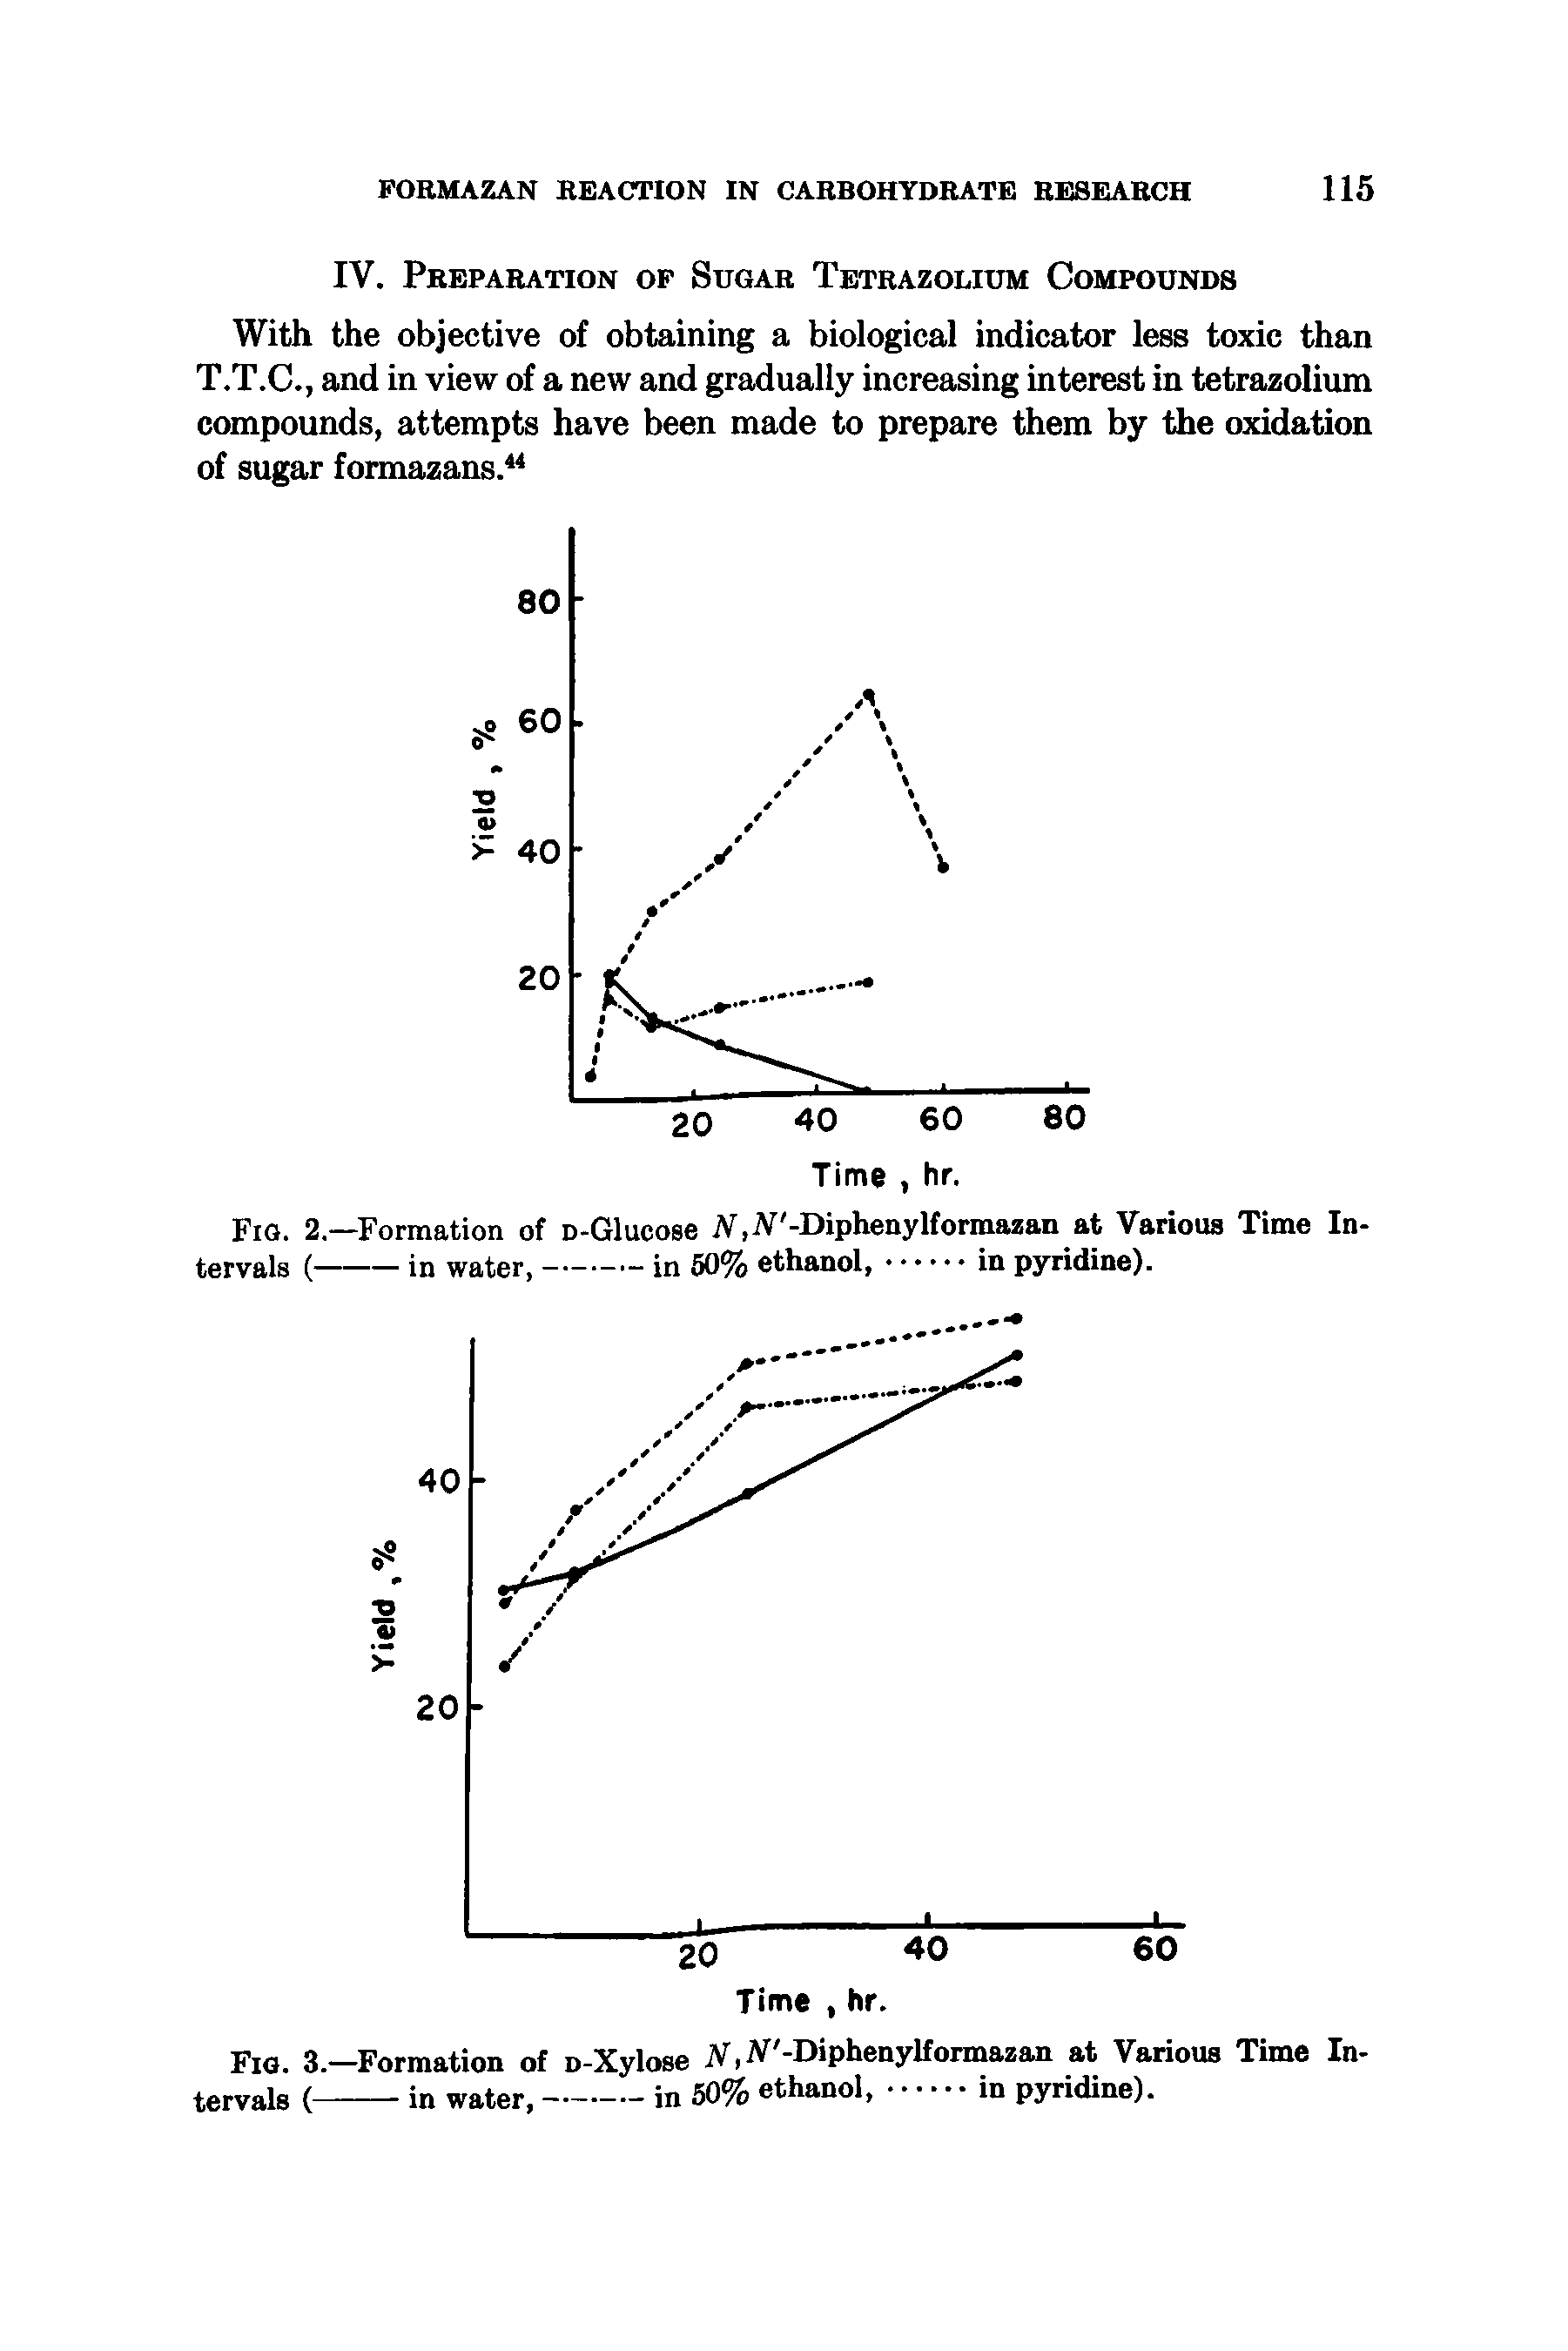 Fig. 2.—Formation of D-Glucose iV.iV -Diphenylformazan at Various Time Intervals (----in water,------- in 50% ethanol,.in pyridine).